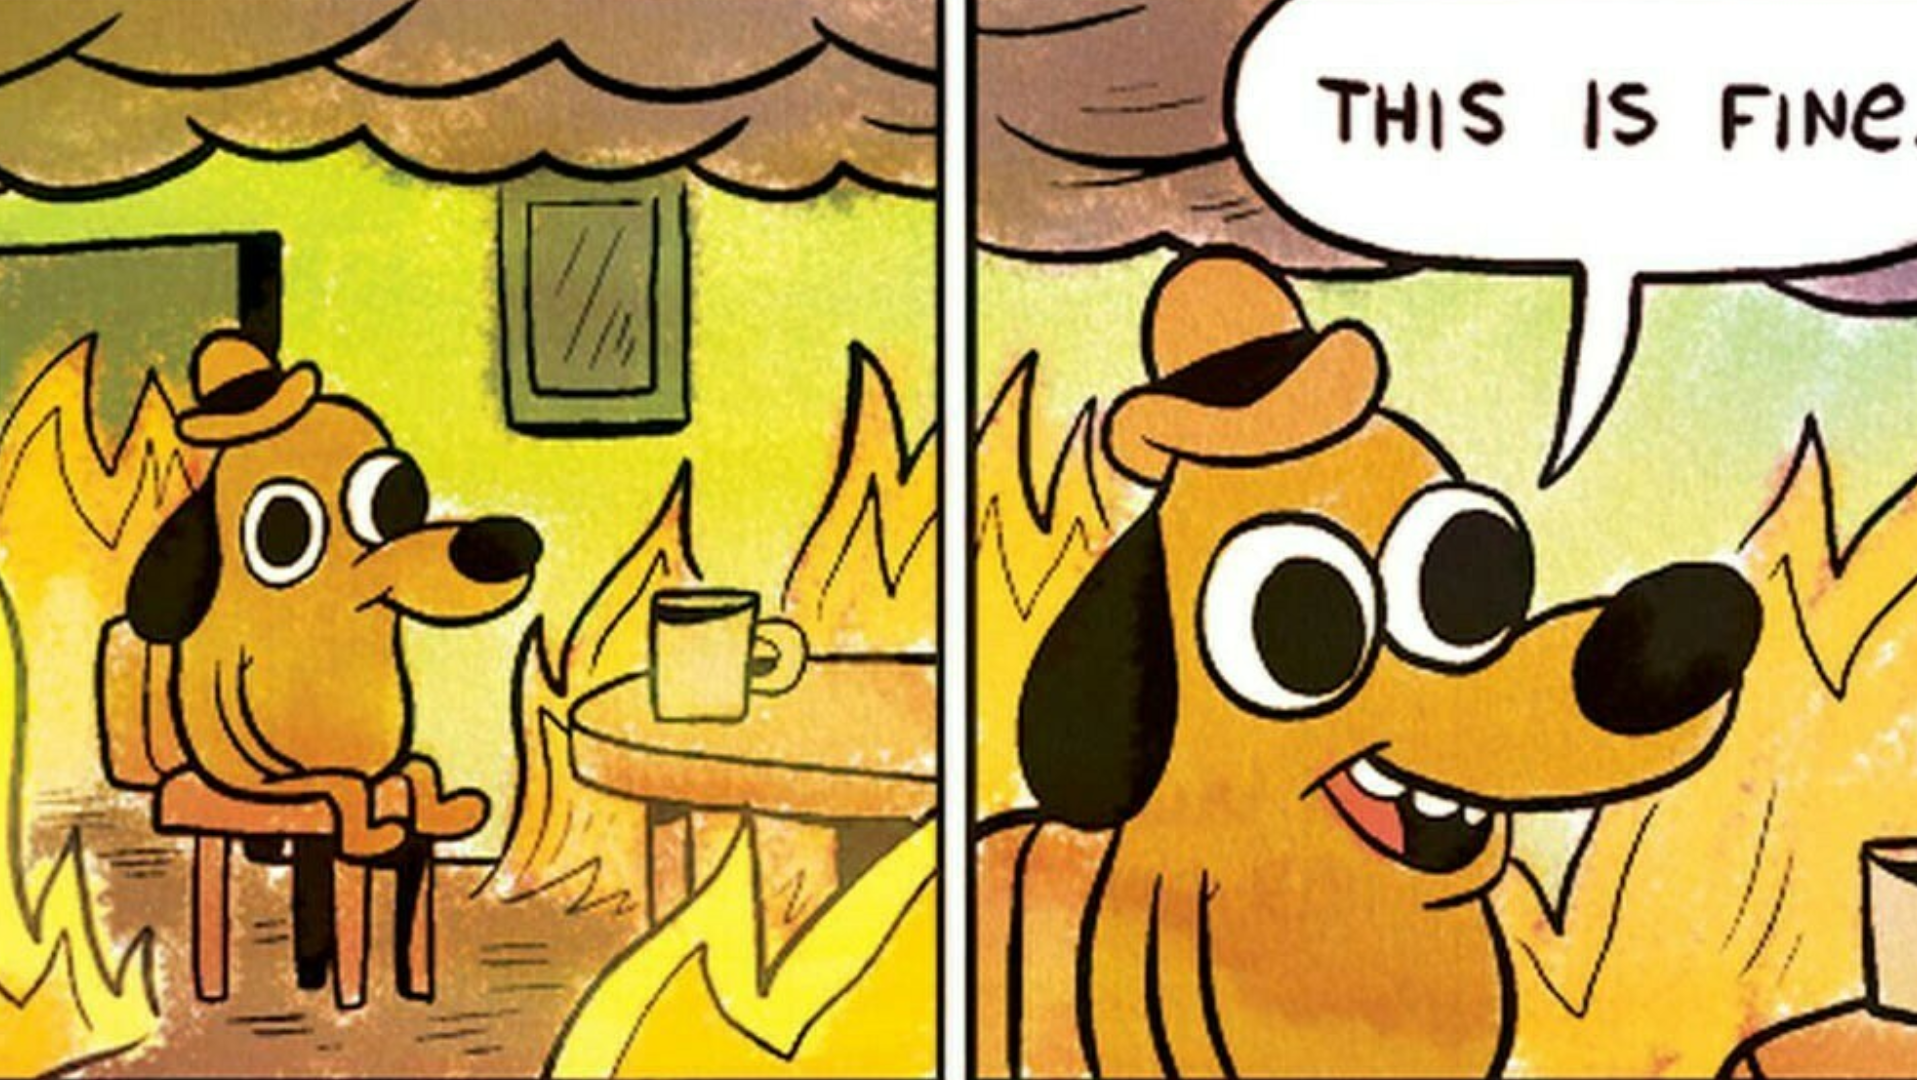 The “This is fine” meme, showing Question Hound sitting and drinking coffee in a room that’s engulfed in flames.